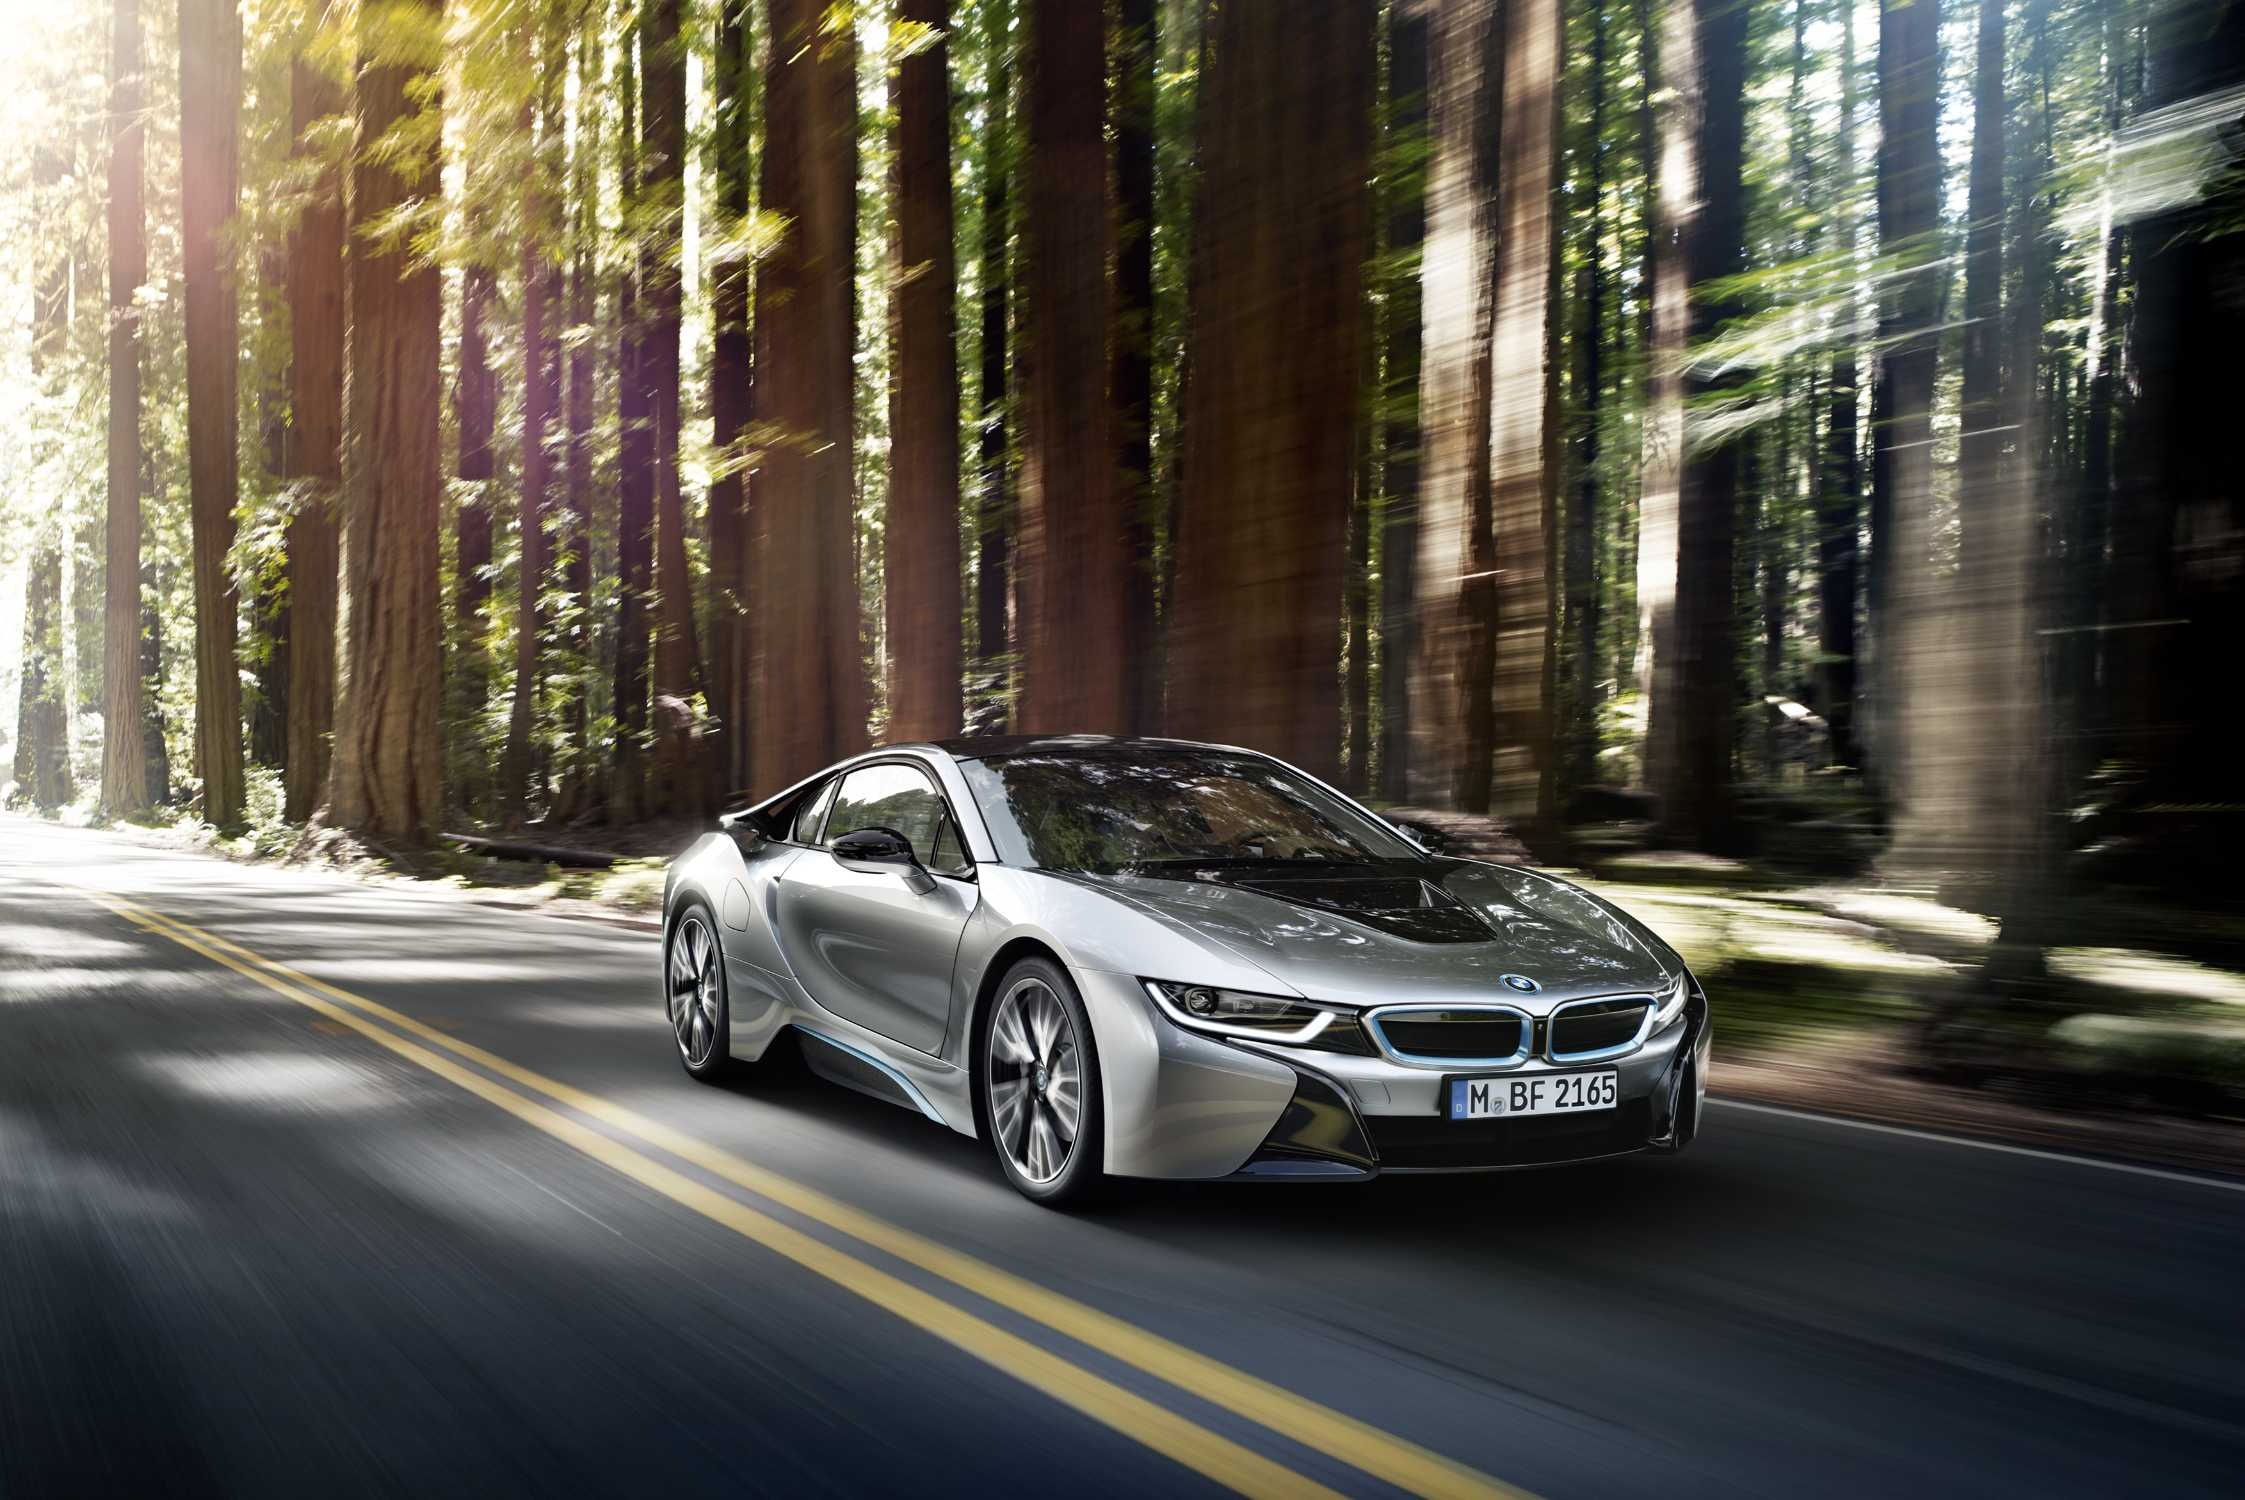 BMW i8, Iconic sports car, Premium performance, Captivating design, Ultimate driving experience, 2250x1500 HD Desktop